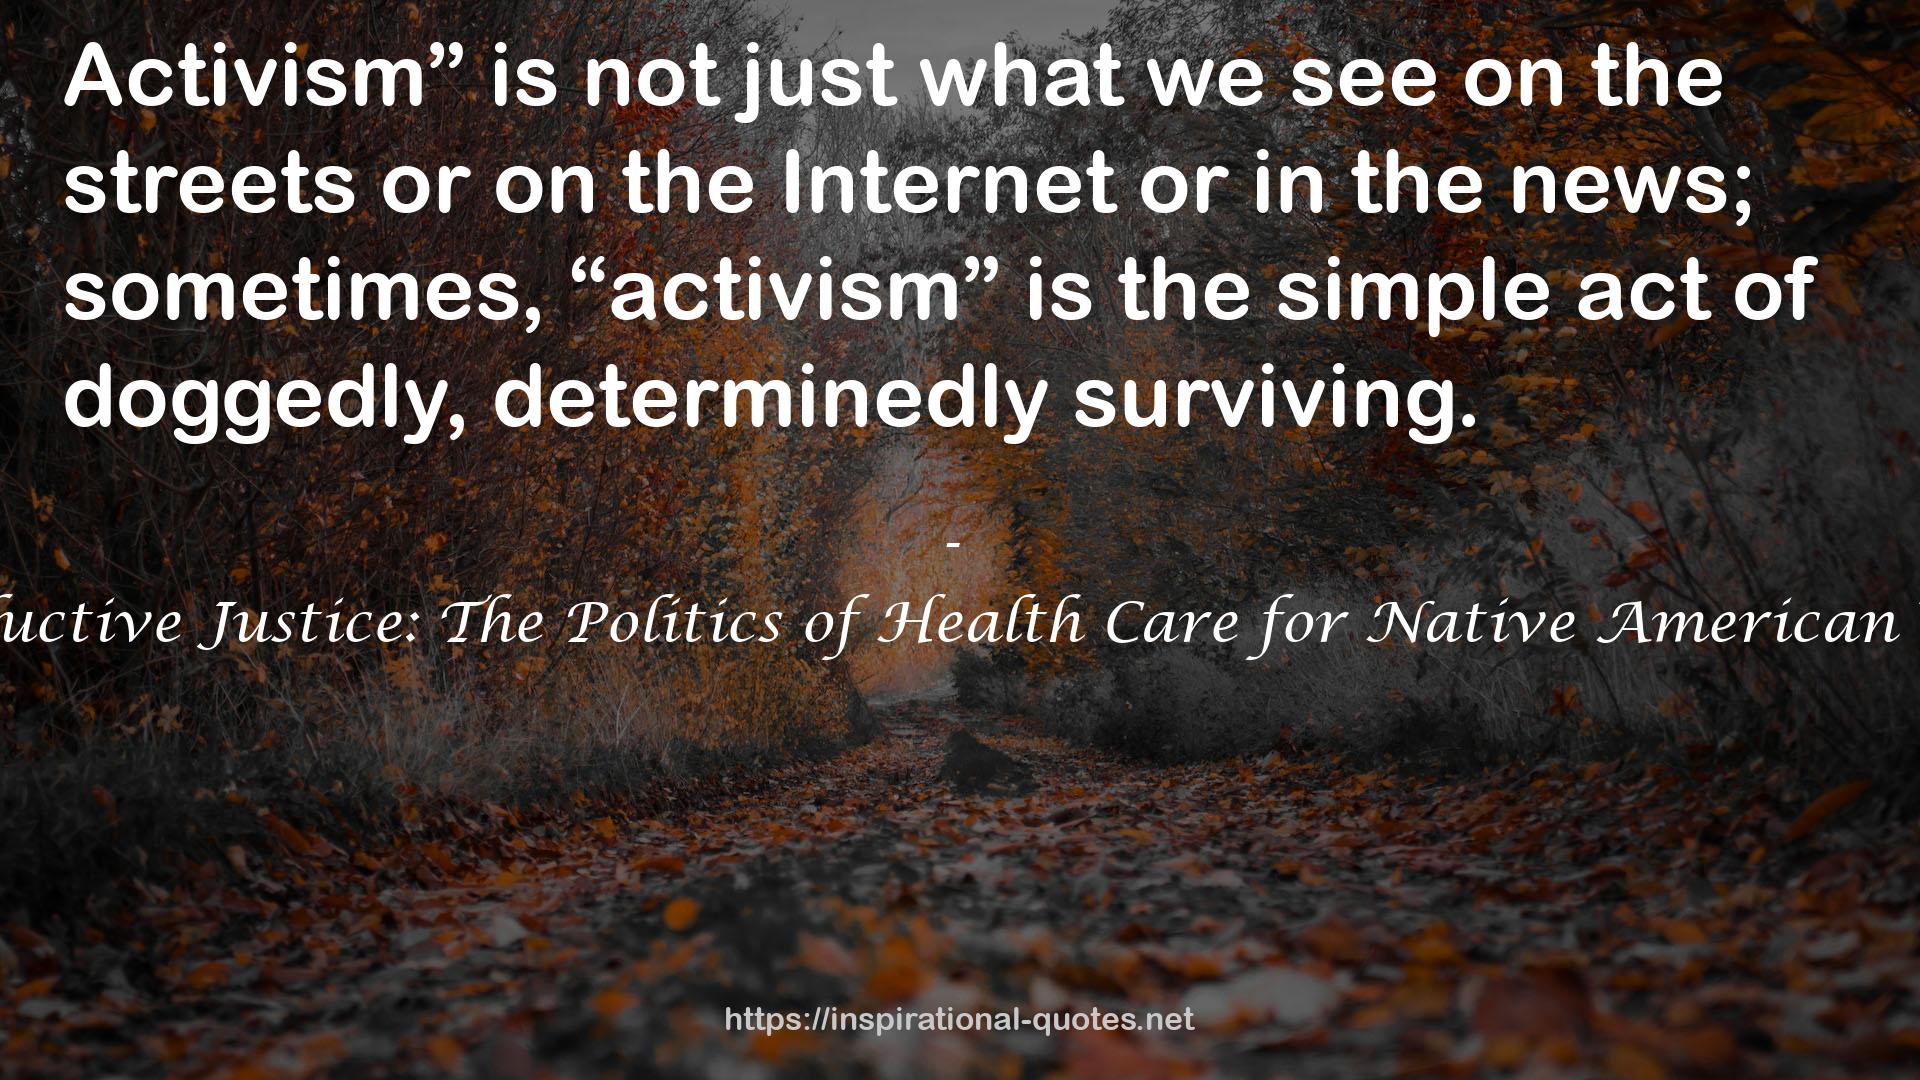 Reproductive Justice: The Politics of Health Care for Native American Women QUOTES